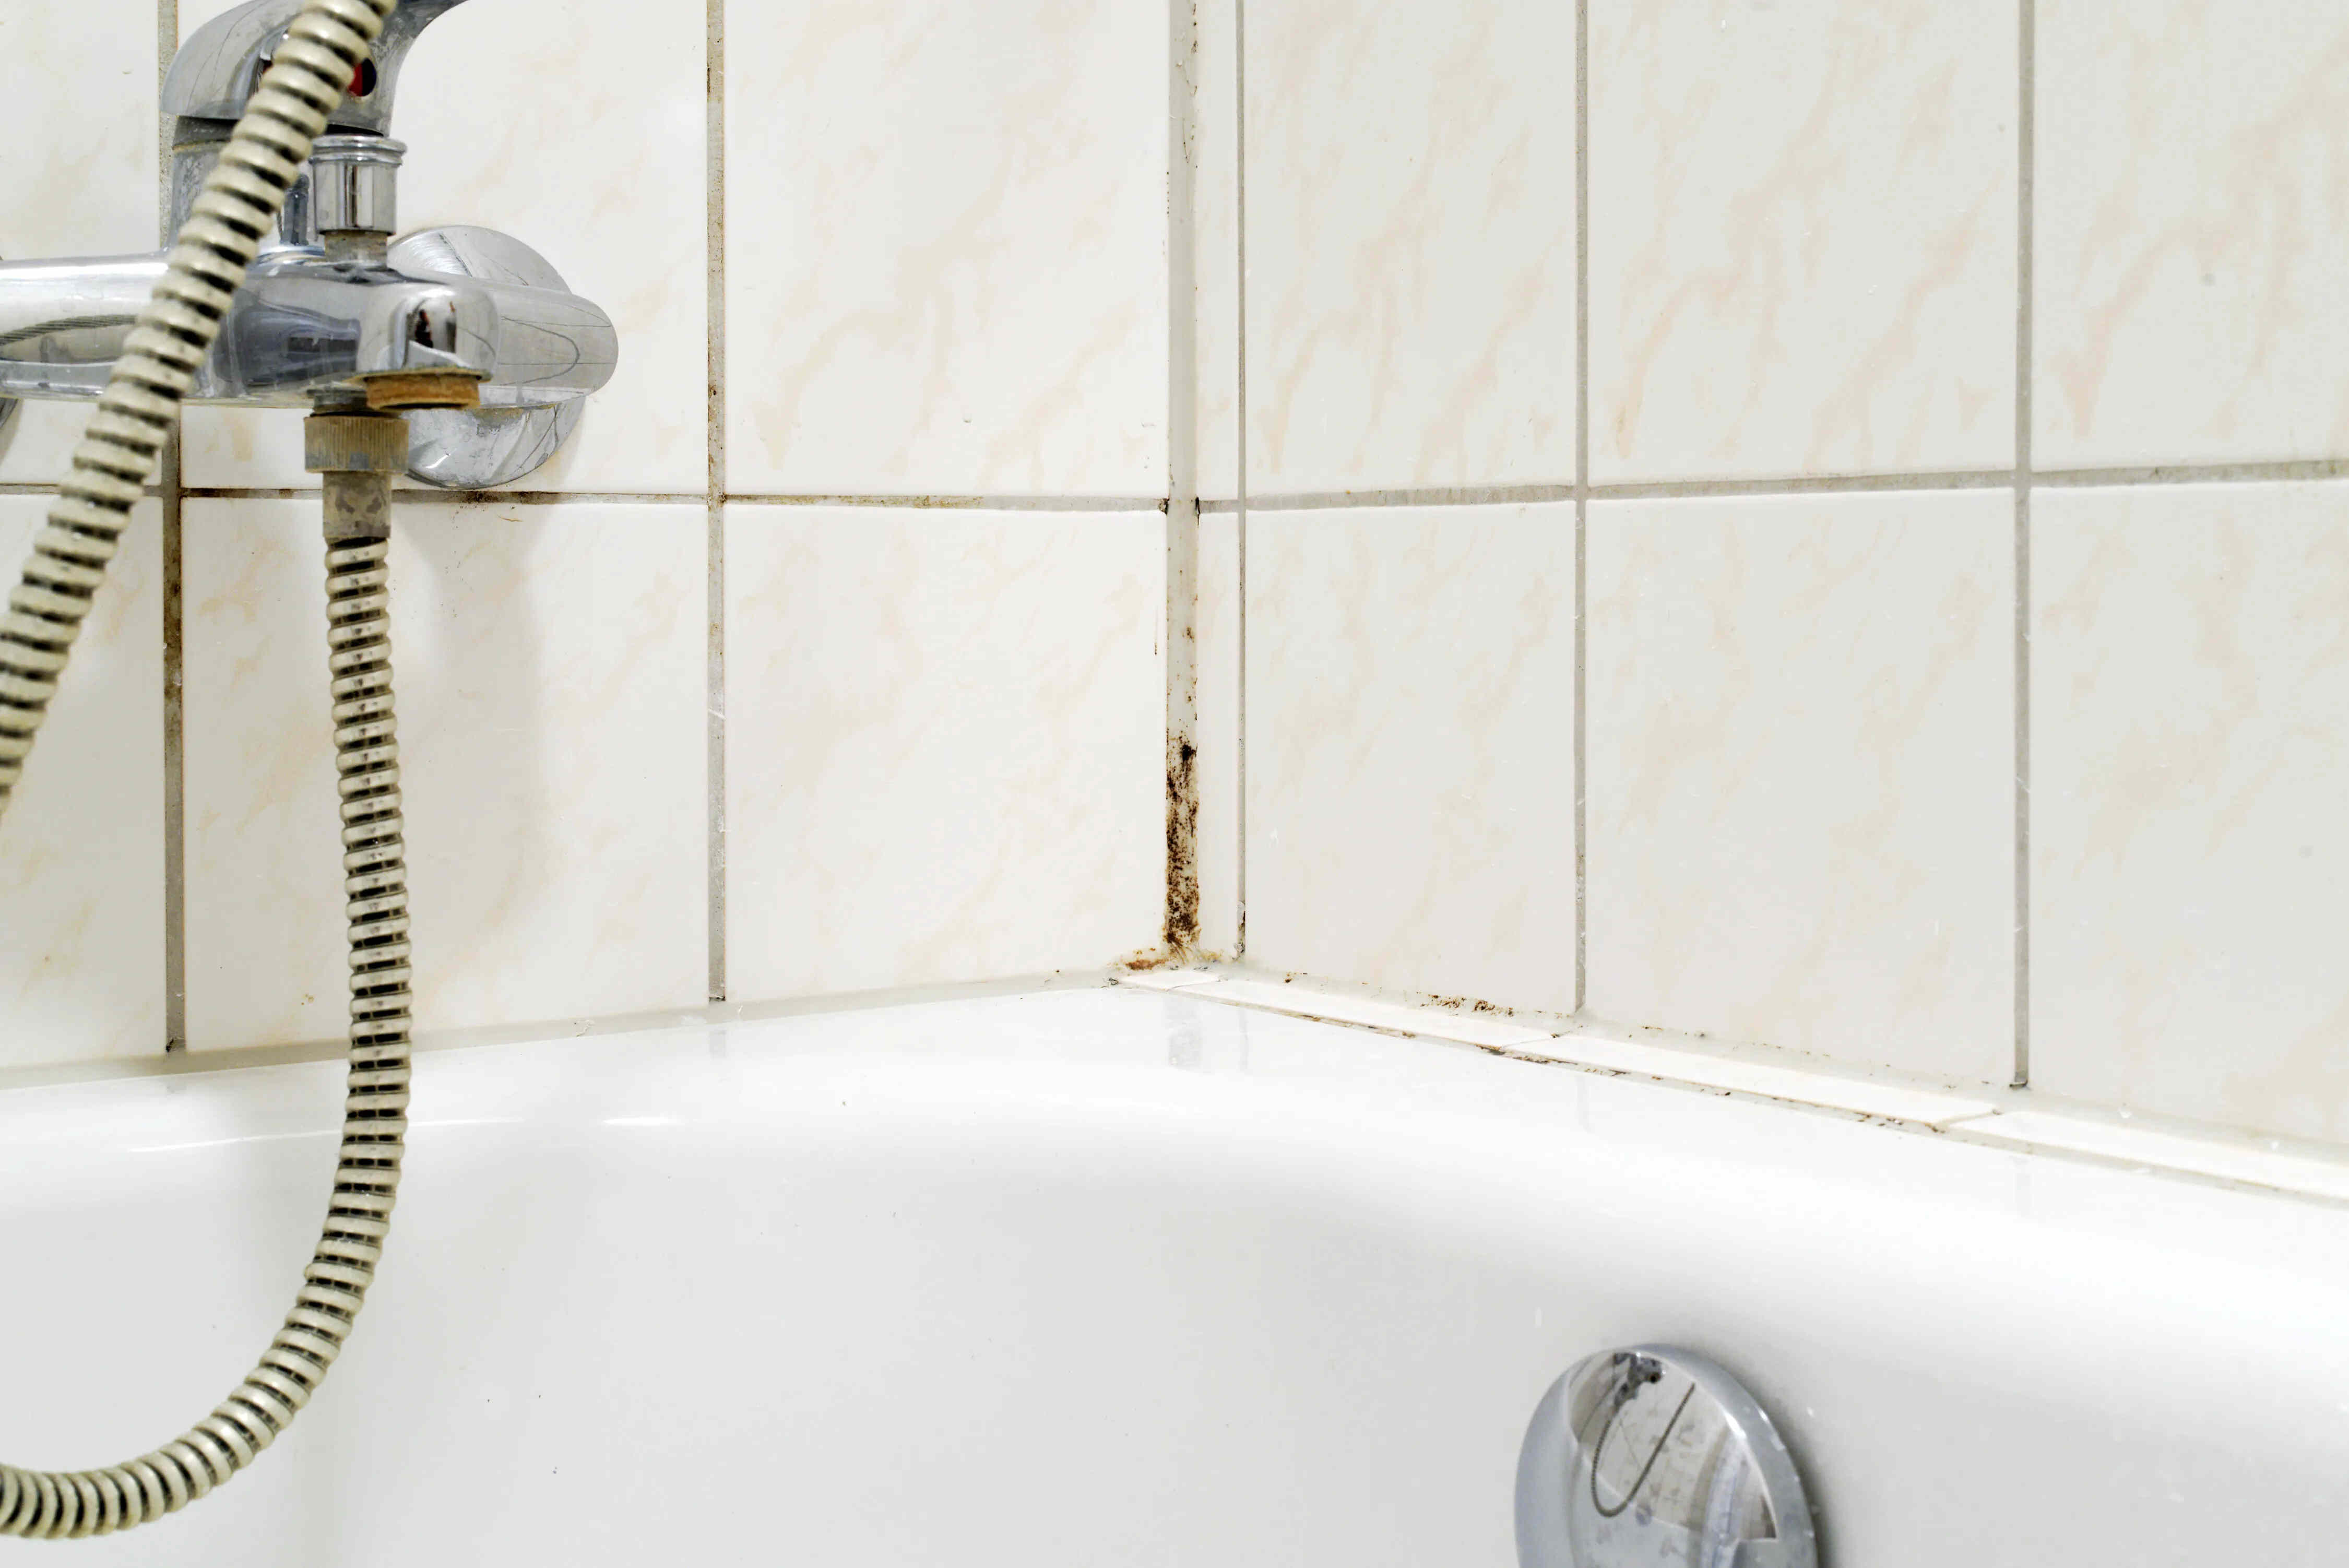 How To Get Rid Of Mold On Bathtub